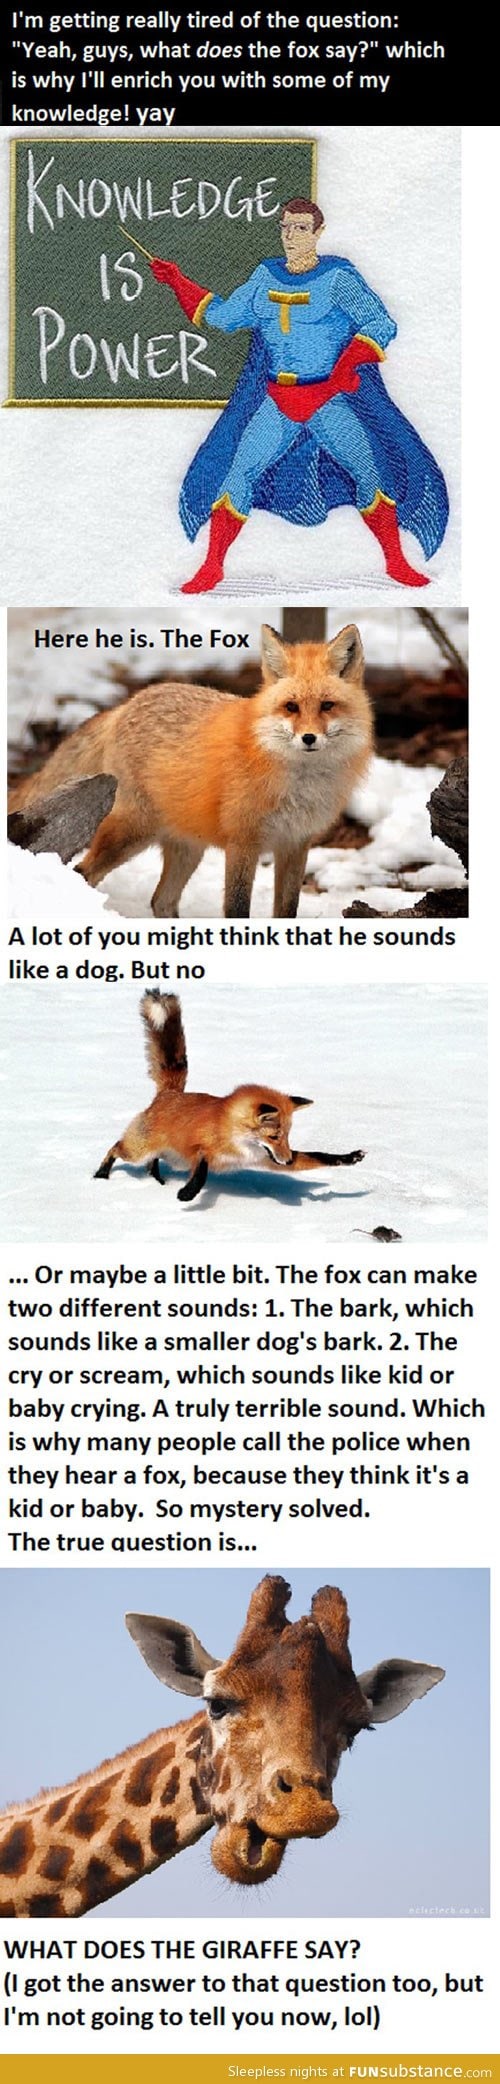 What the fox really says